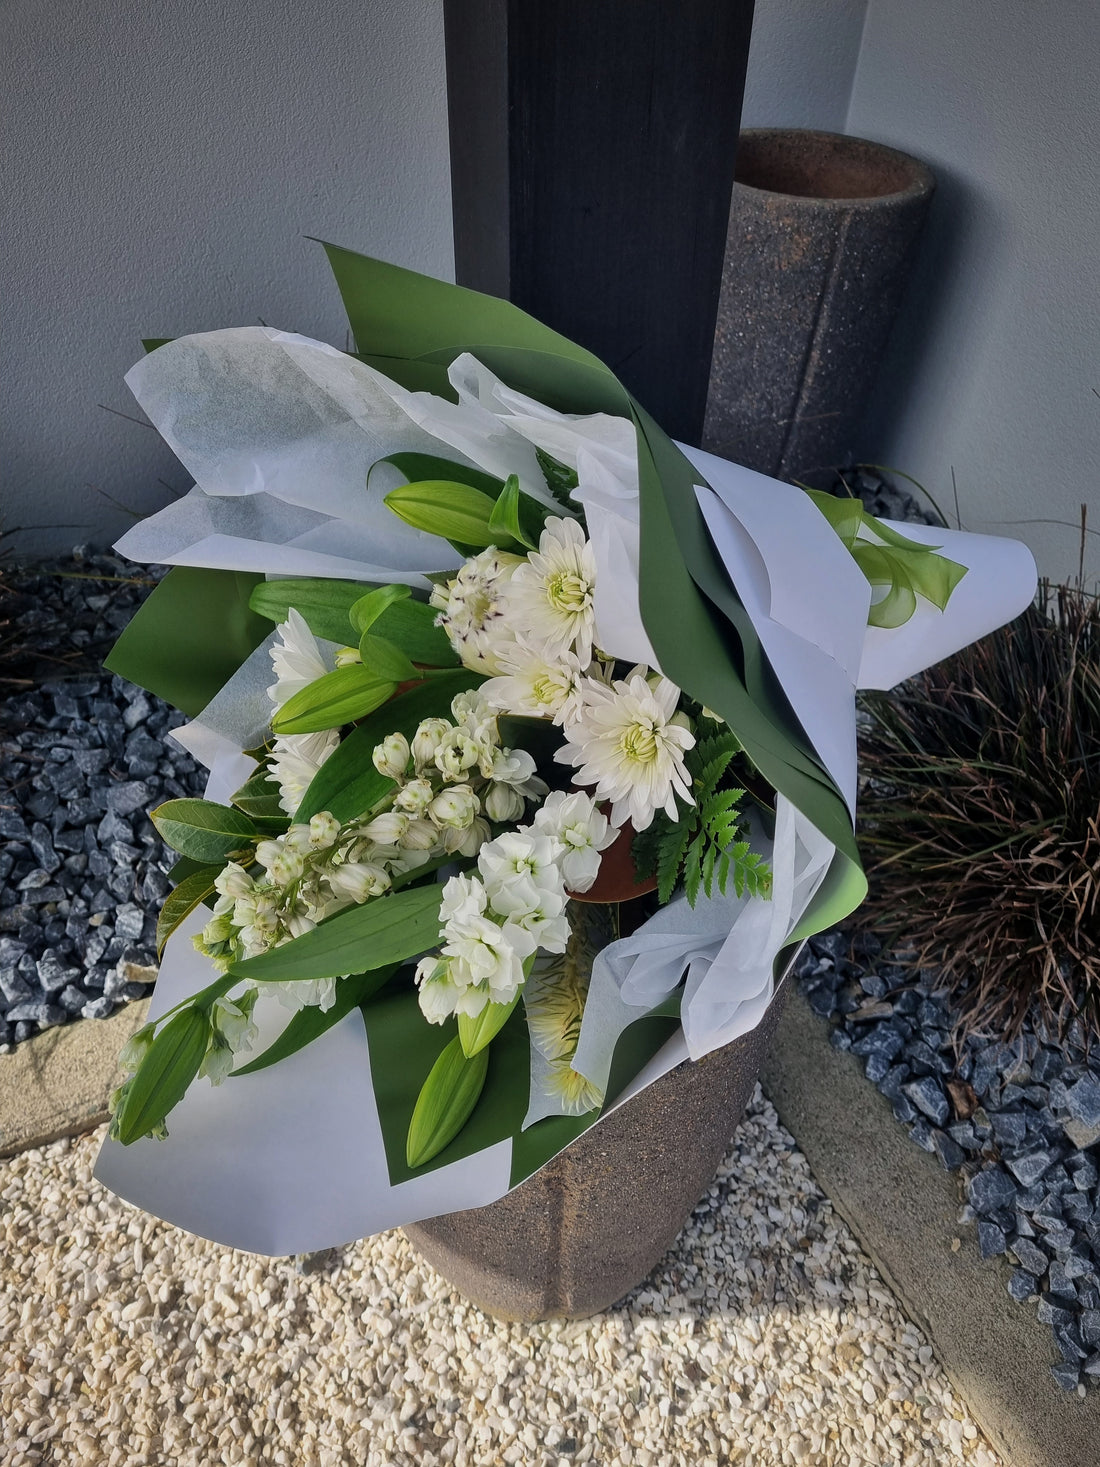 Whites &amp; Greens floral bouquet with white flowers and vibrant green foliage, wrapped in white and green tissue paper.